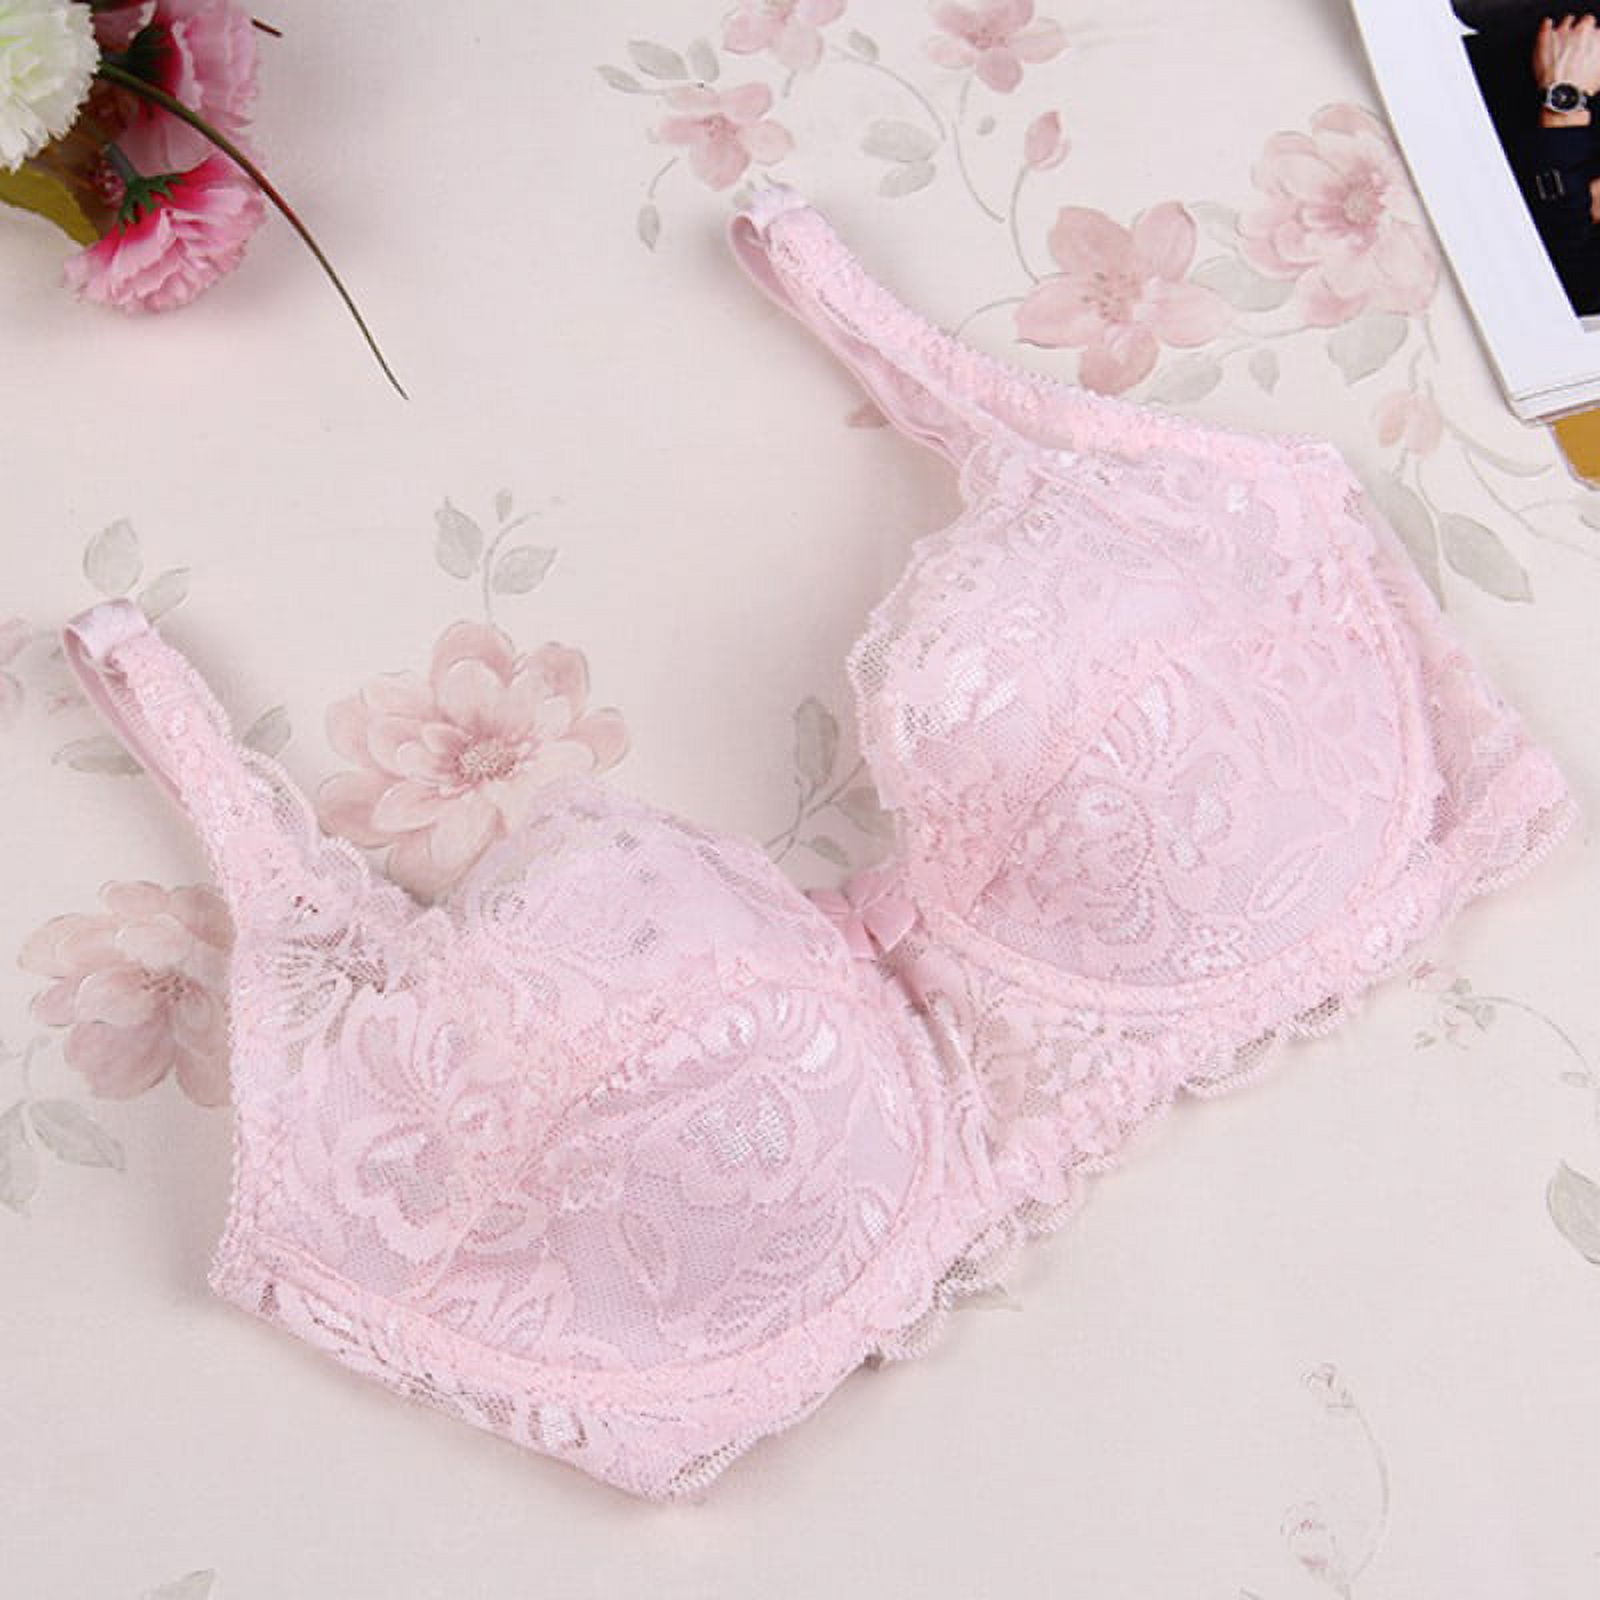 Promotion Clearance Women Sexy Underwear Brand Lace Minimizer